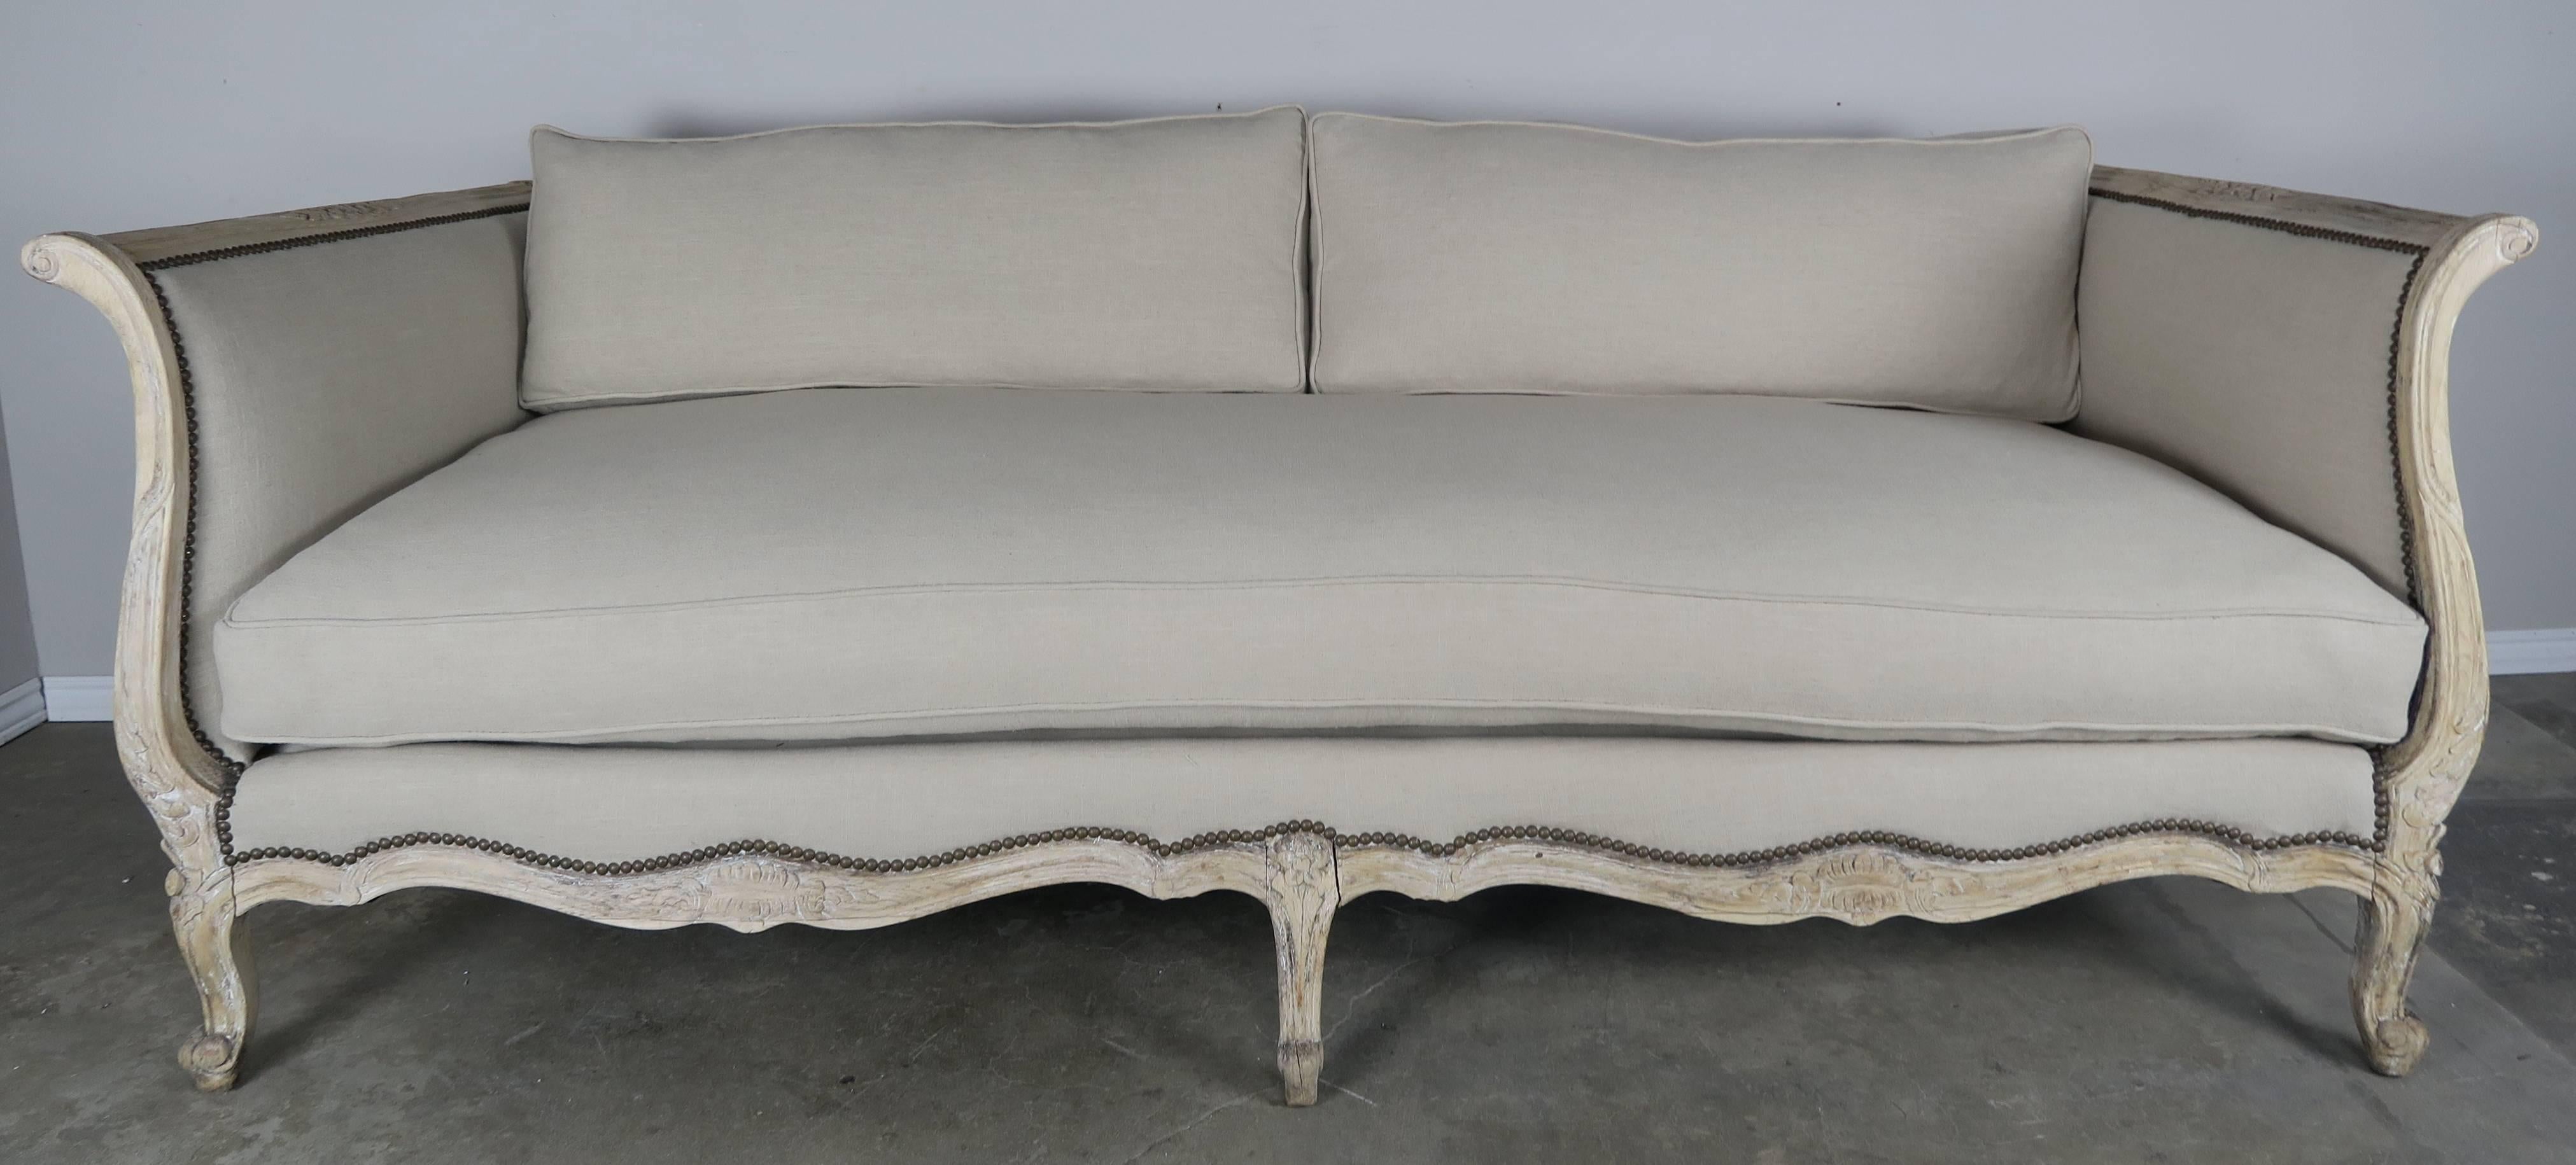 19th century French carved natural wood sofa newly upholstered in a natural colored linen and finished with antique brass colored nailheads. The Louis XV style sofa stands on six cabriole legs that end in ram's head feet. Loose down filled cushions.